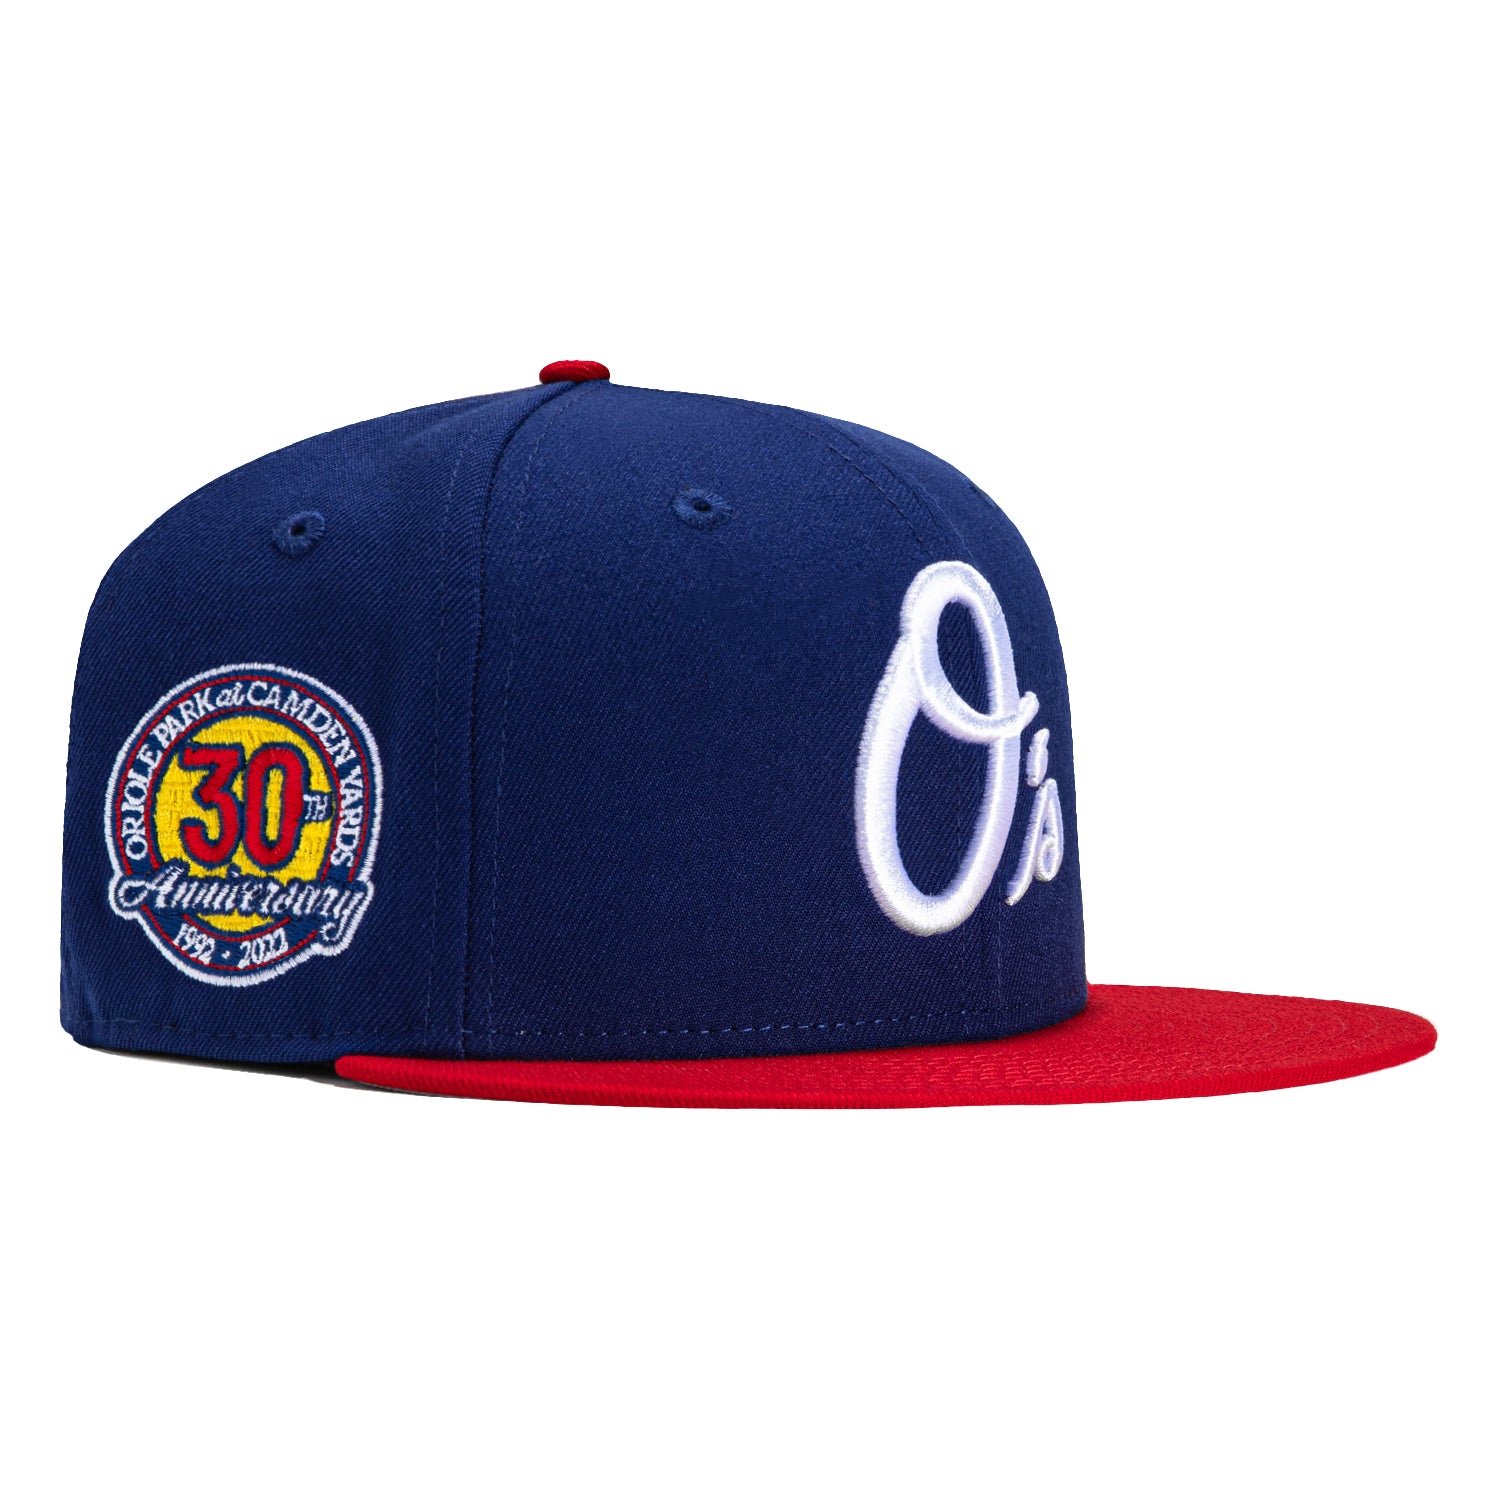 New Era 59Fifty Baltimore Orioles 30th Anniversary Patch Alternate Hat - Royal, Red